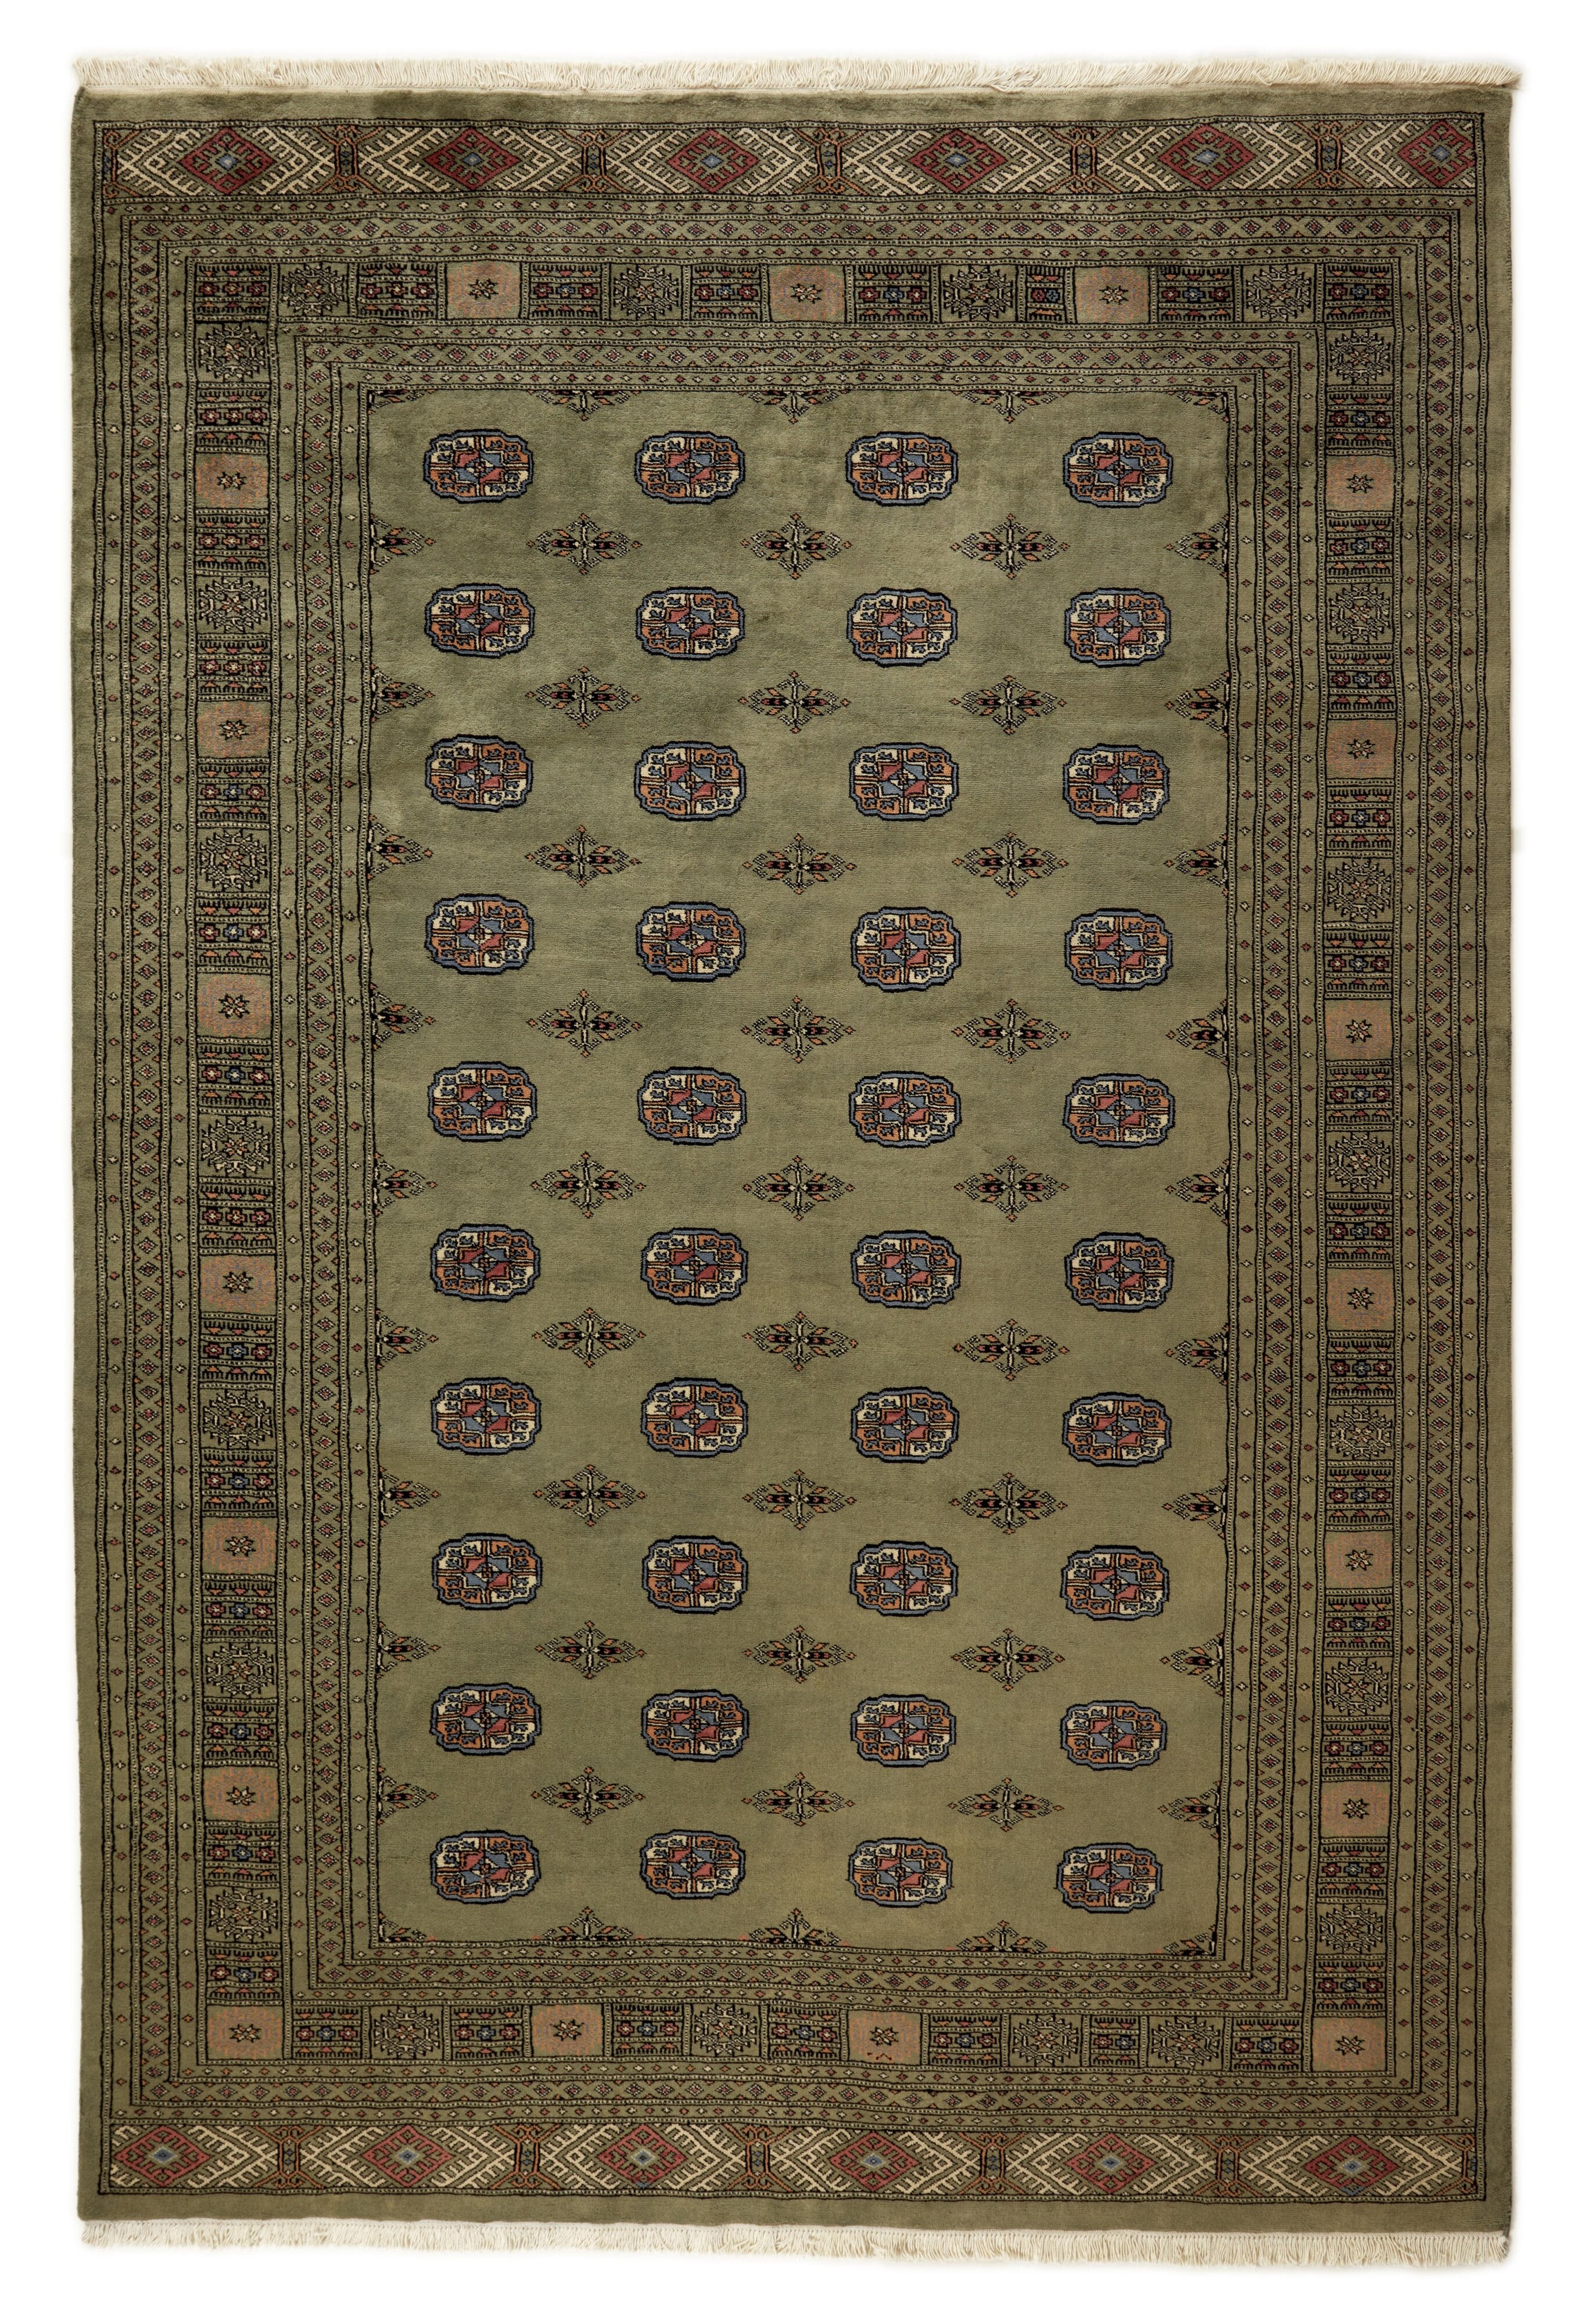 Green Oriental rug with traditional bordered pattern